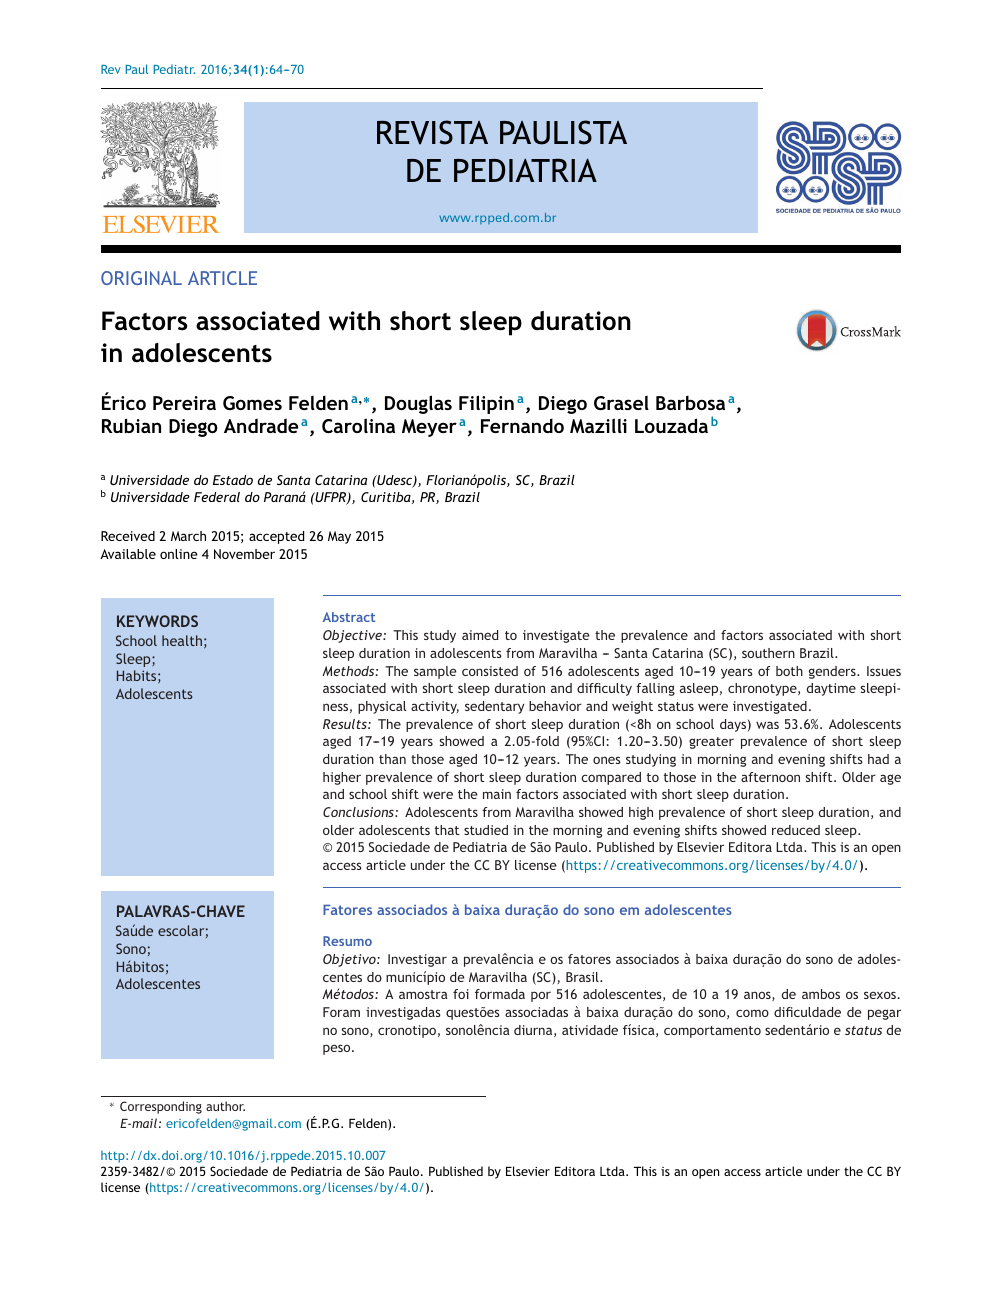 Factors Associated With Short Sleep Duration In Adolescents Topic Of Research Paper In Basic Medicine Download Scholarly Article Pdf And Read For Free On Cyberleninka Open Science Hub